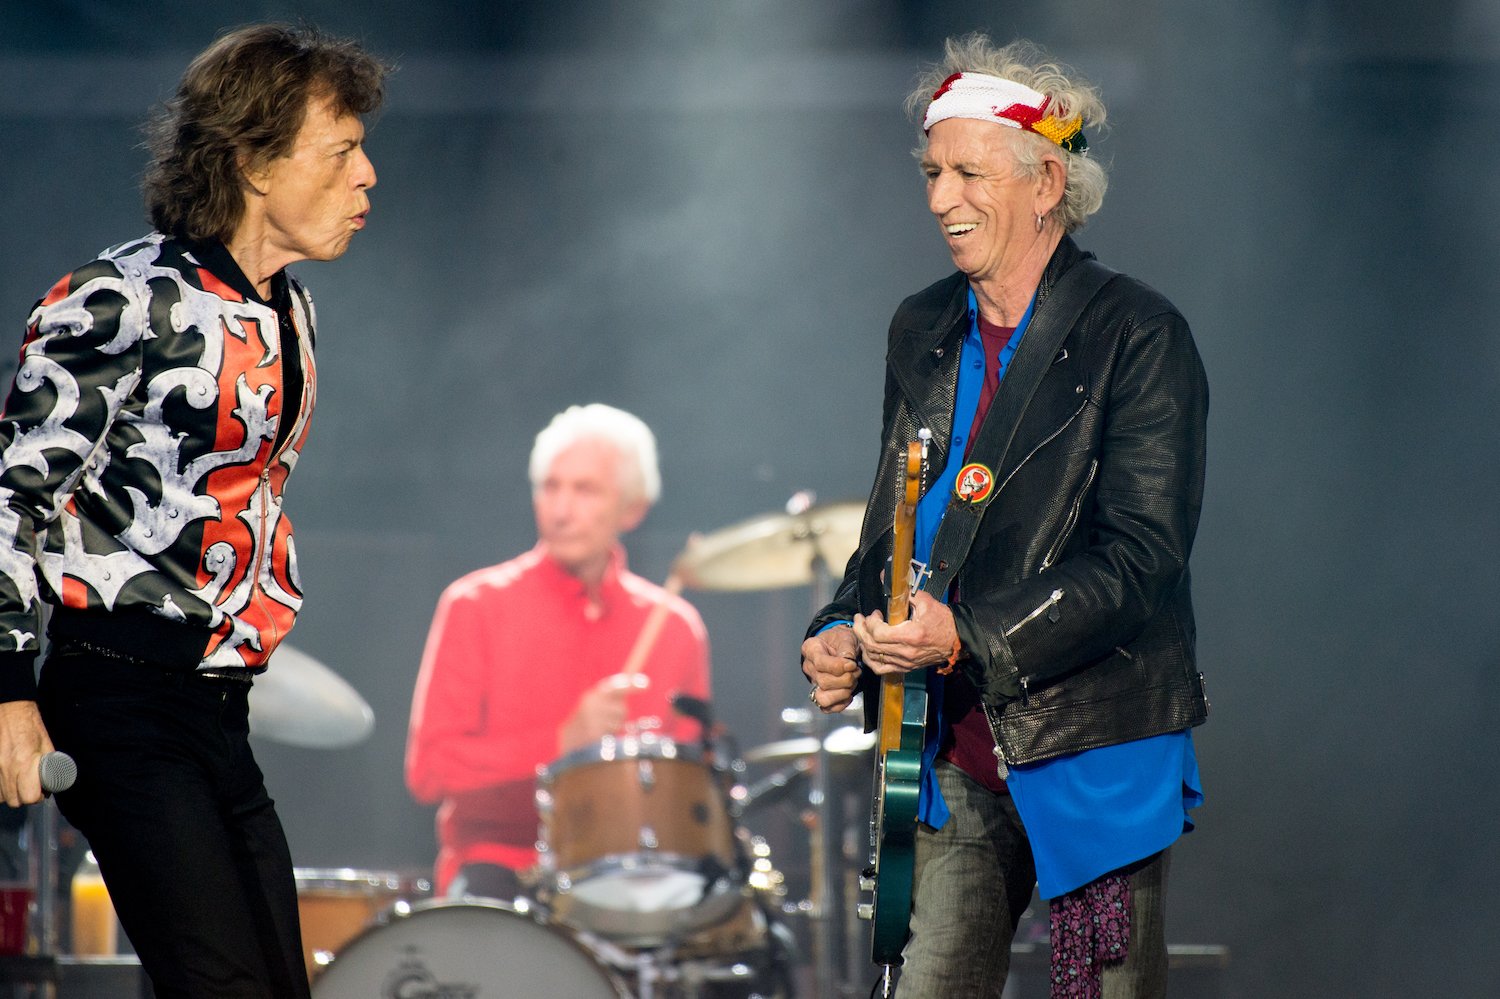 Mick Jagger and Keith Richards perform at The London Stadium in 2018 in London, England